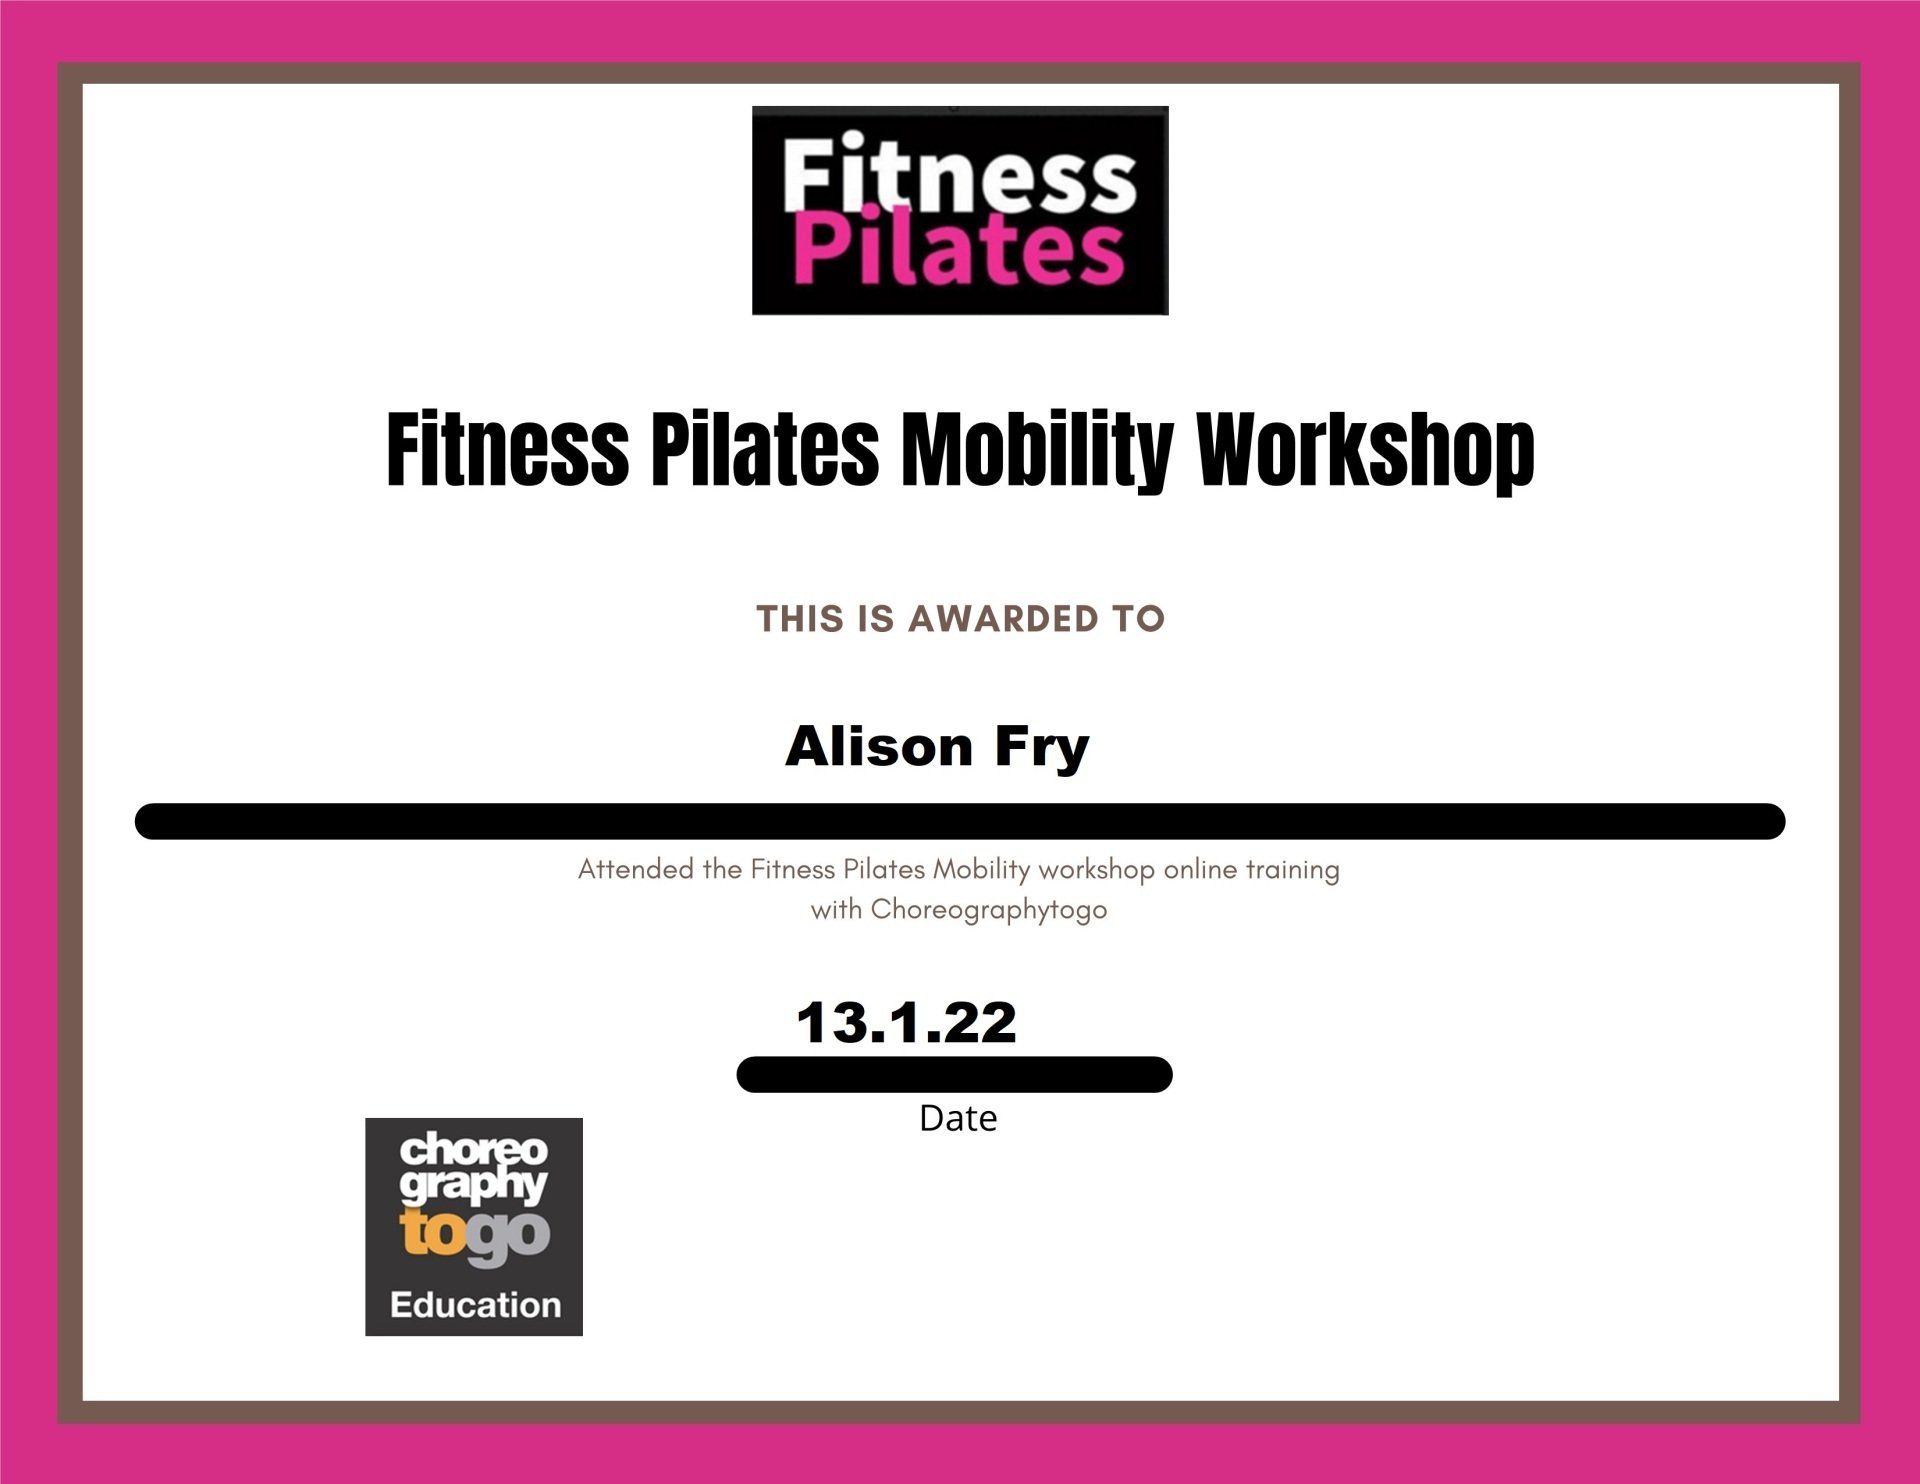 Fitness Pilates Mobility Workshop Certification  - 13th January 2022